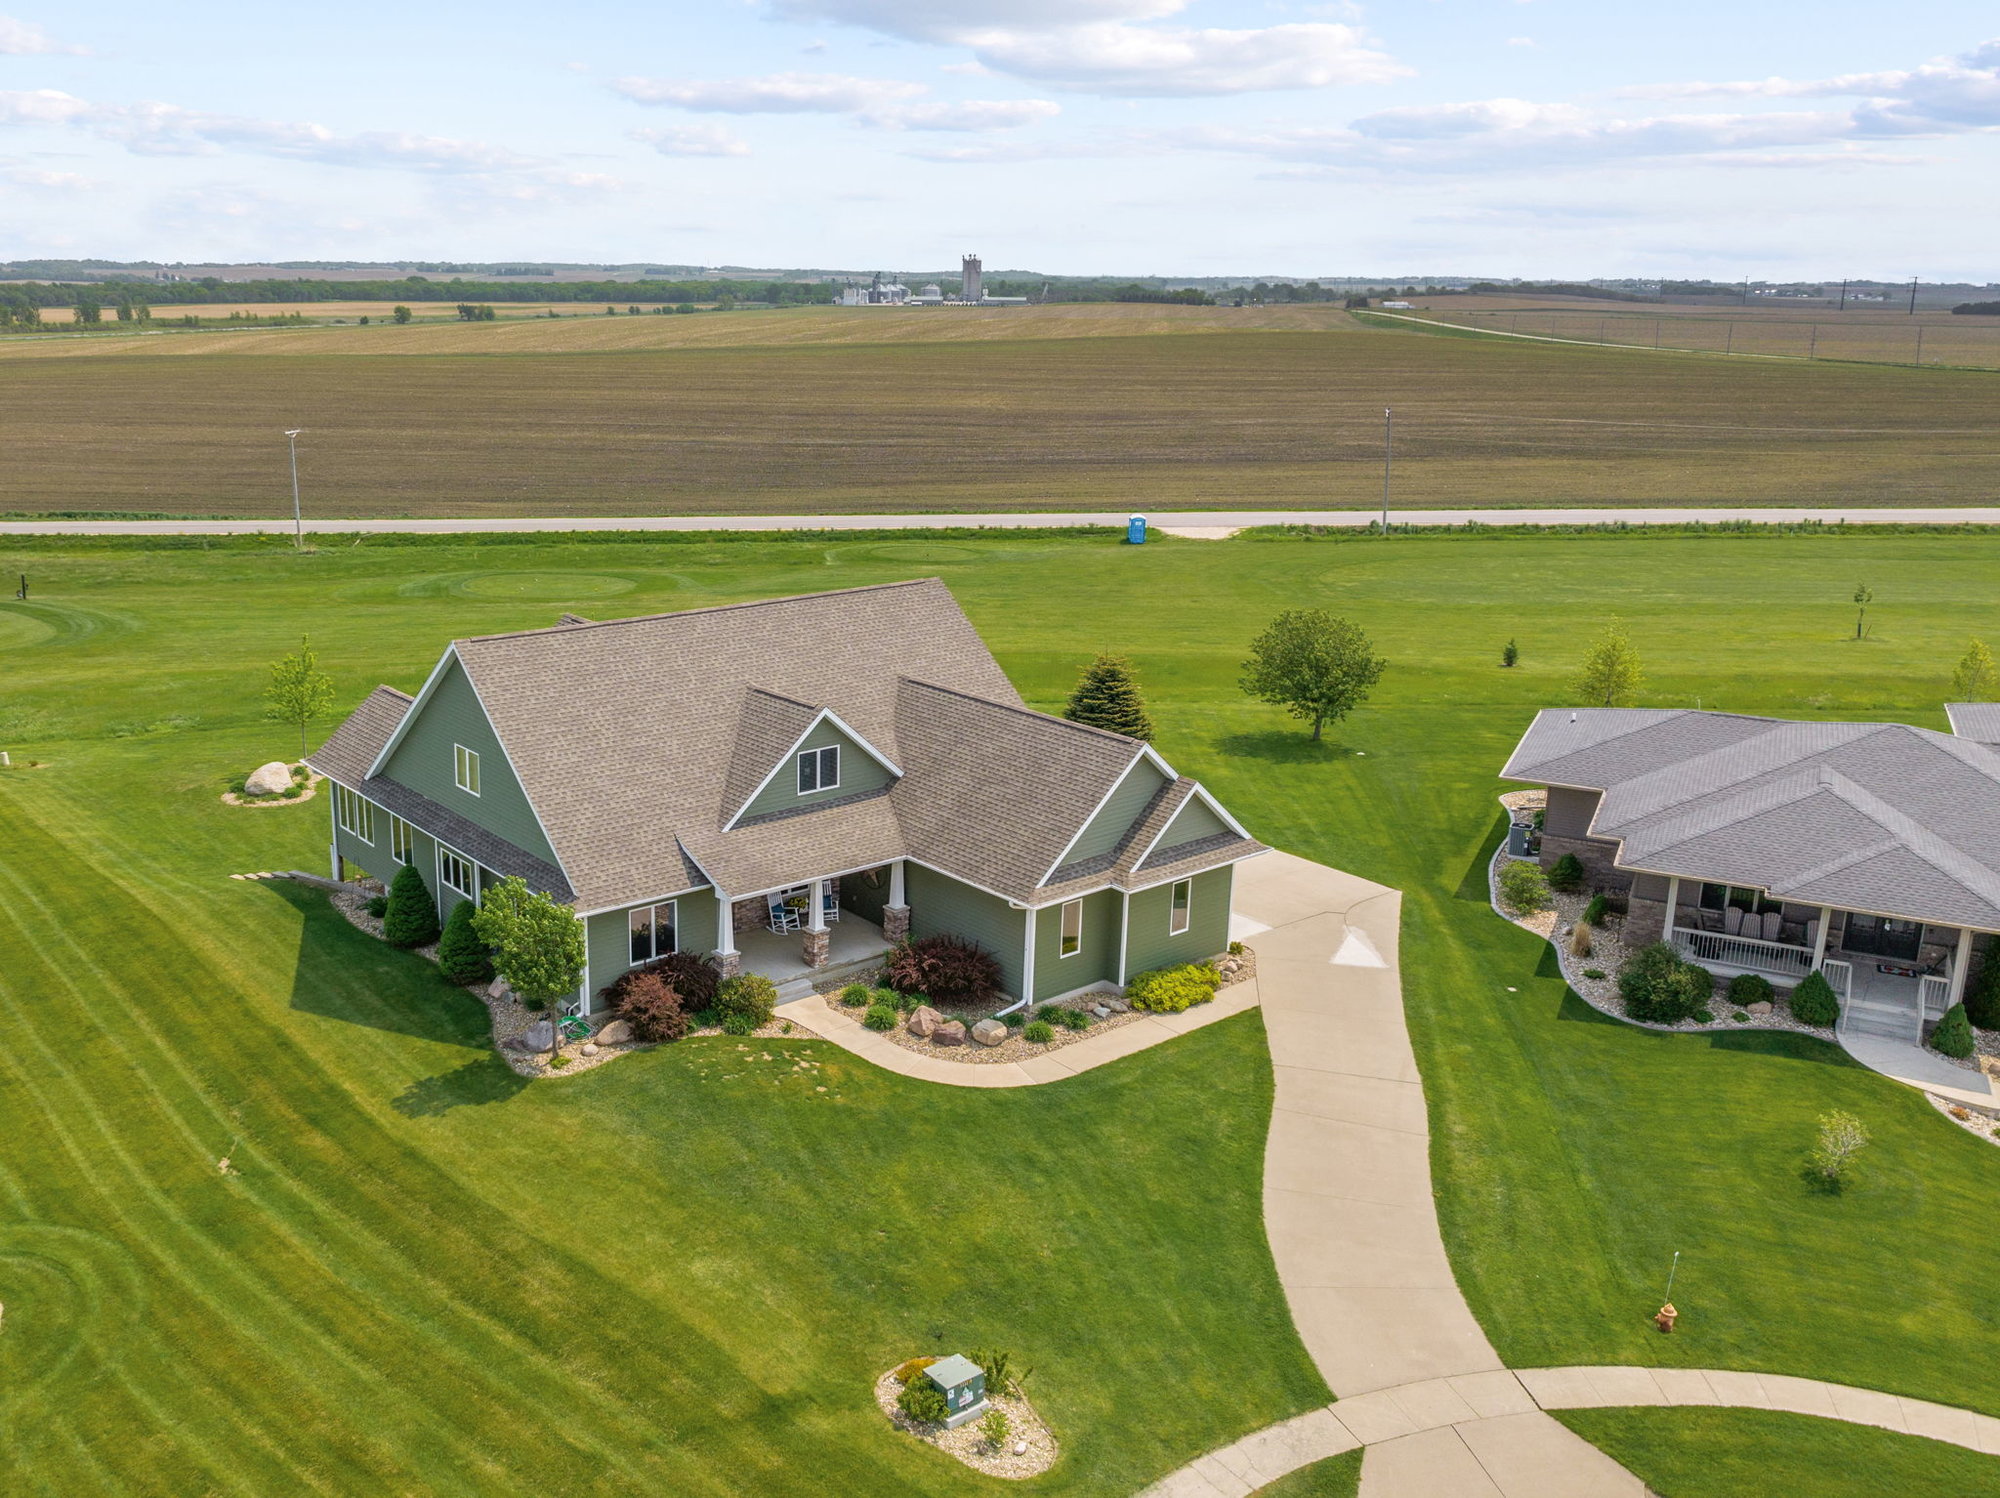 Love From First Sight. Instantly Fall in Love With this Stunning Two-Story Home in Parkersburg Iowa.